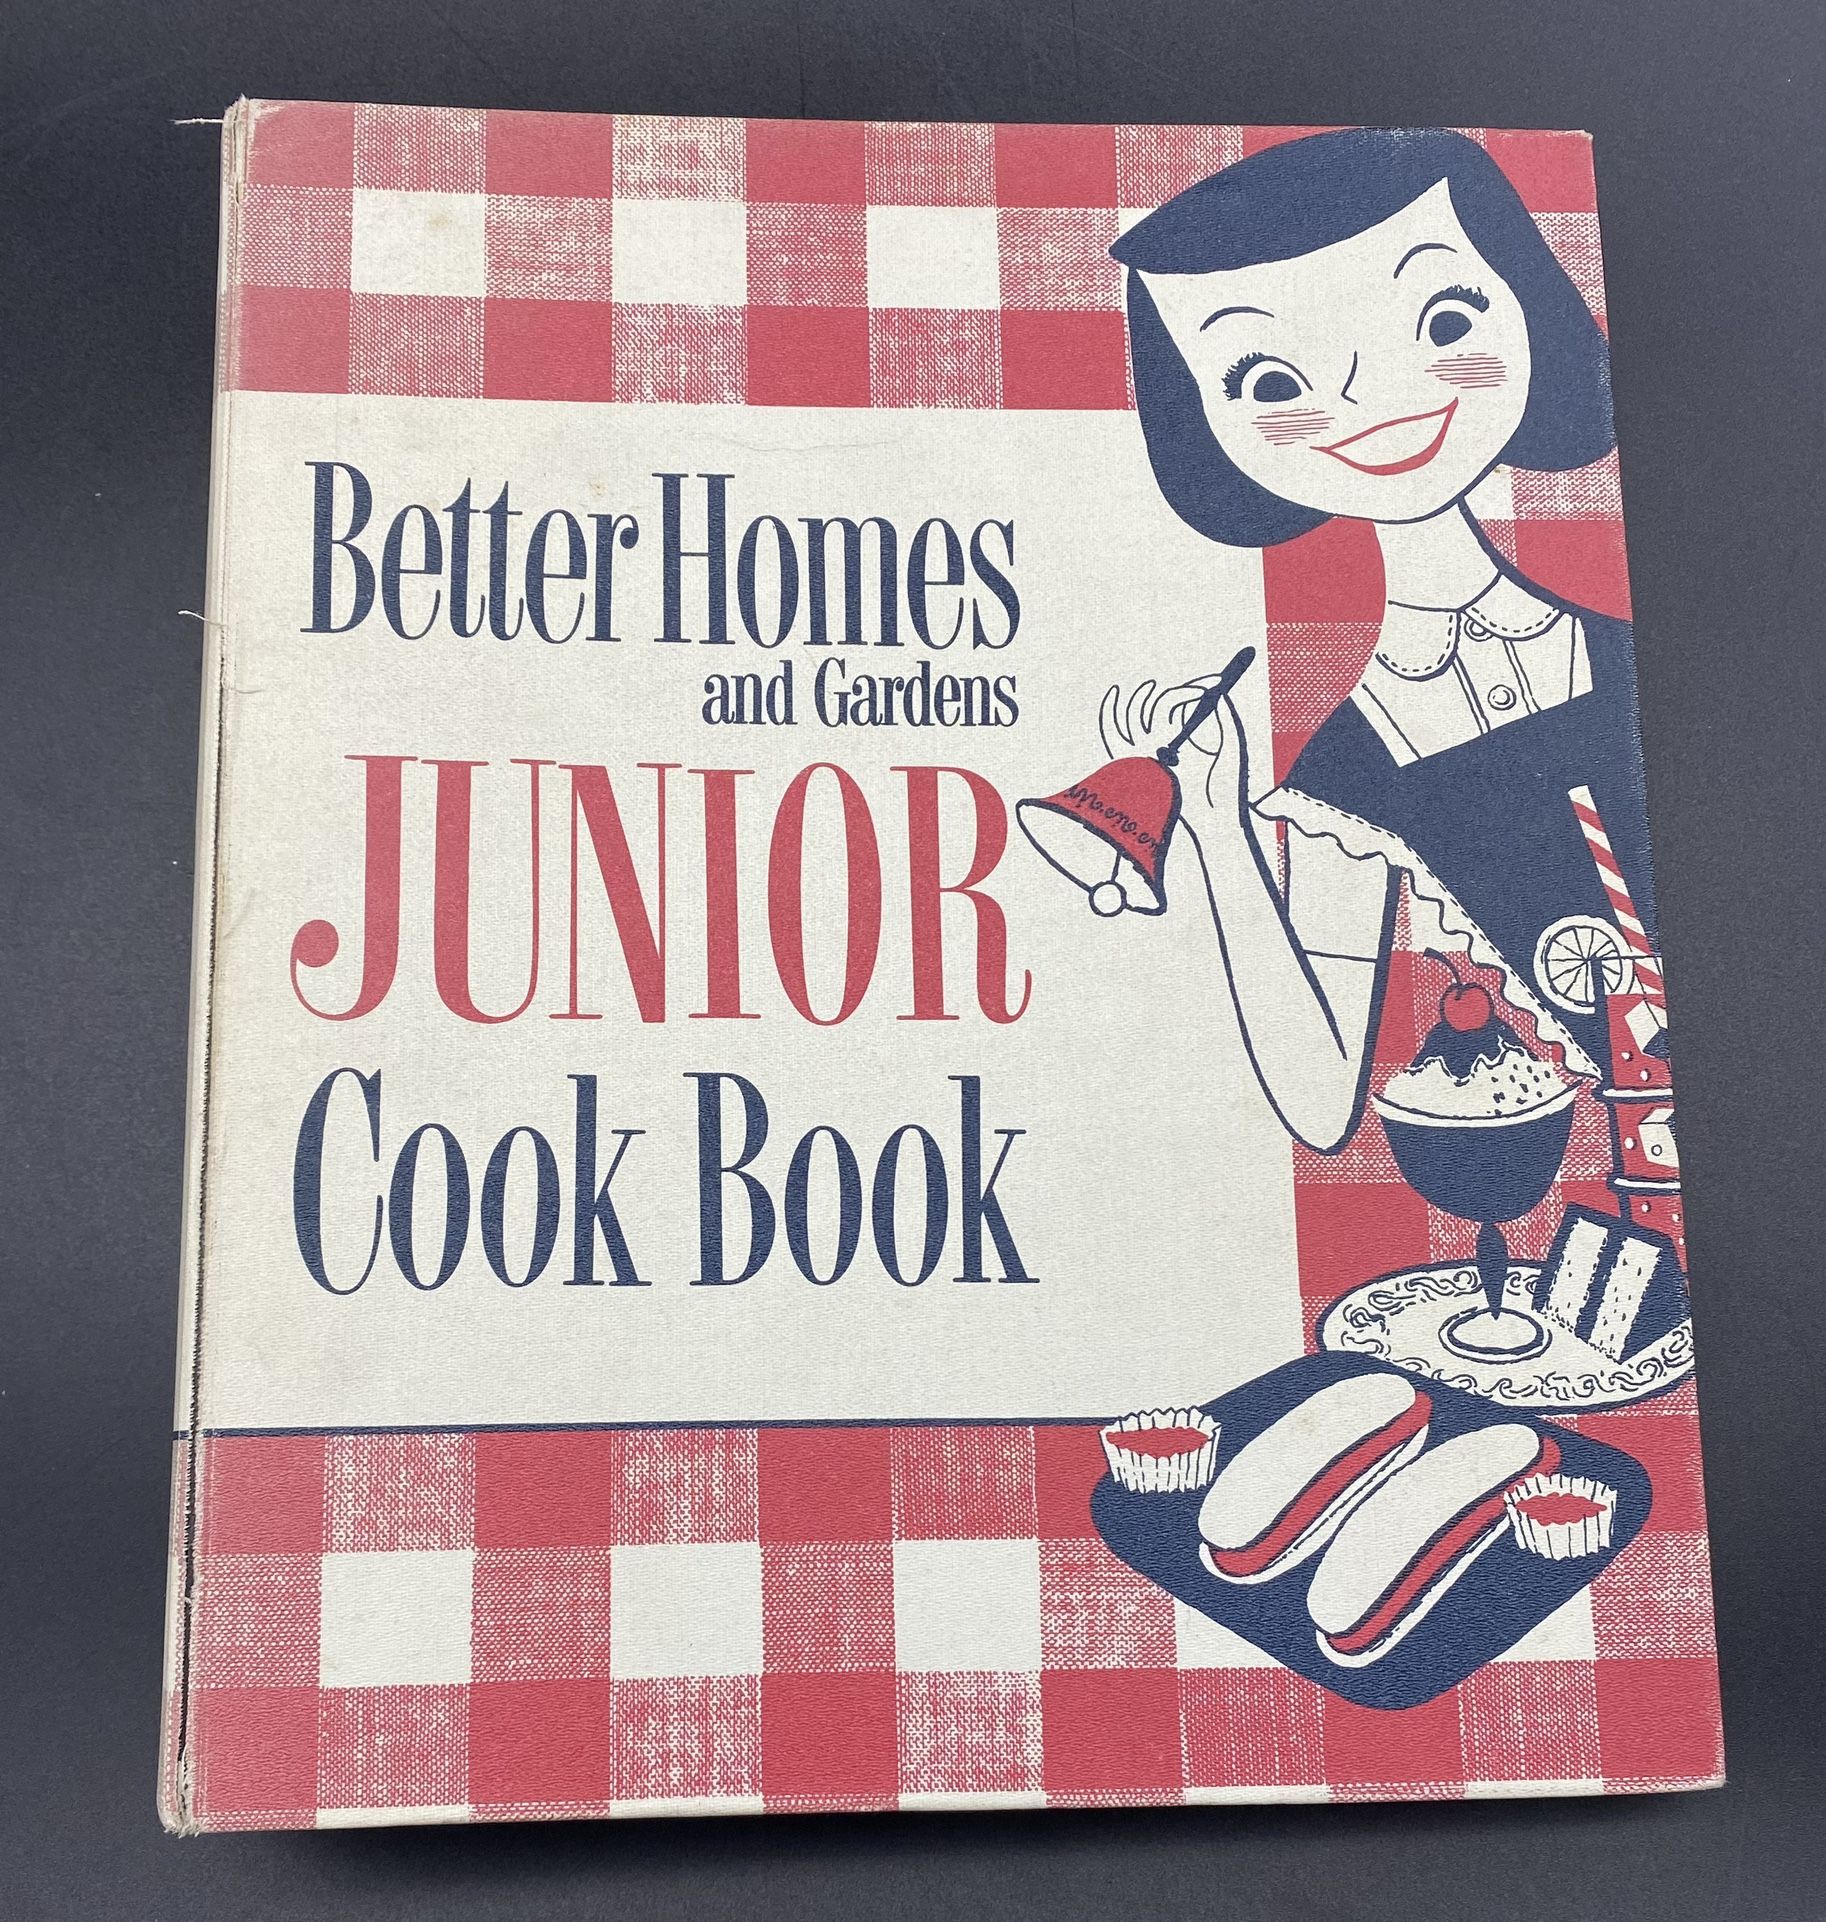 First Edition1955 Better Homes & Gardens,Junior Cook Book Hard Cover Illustrated